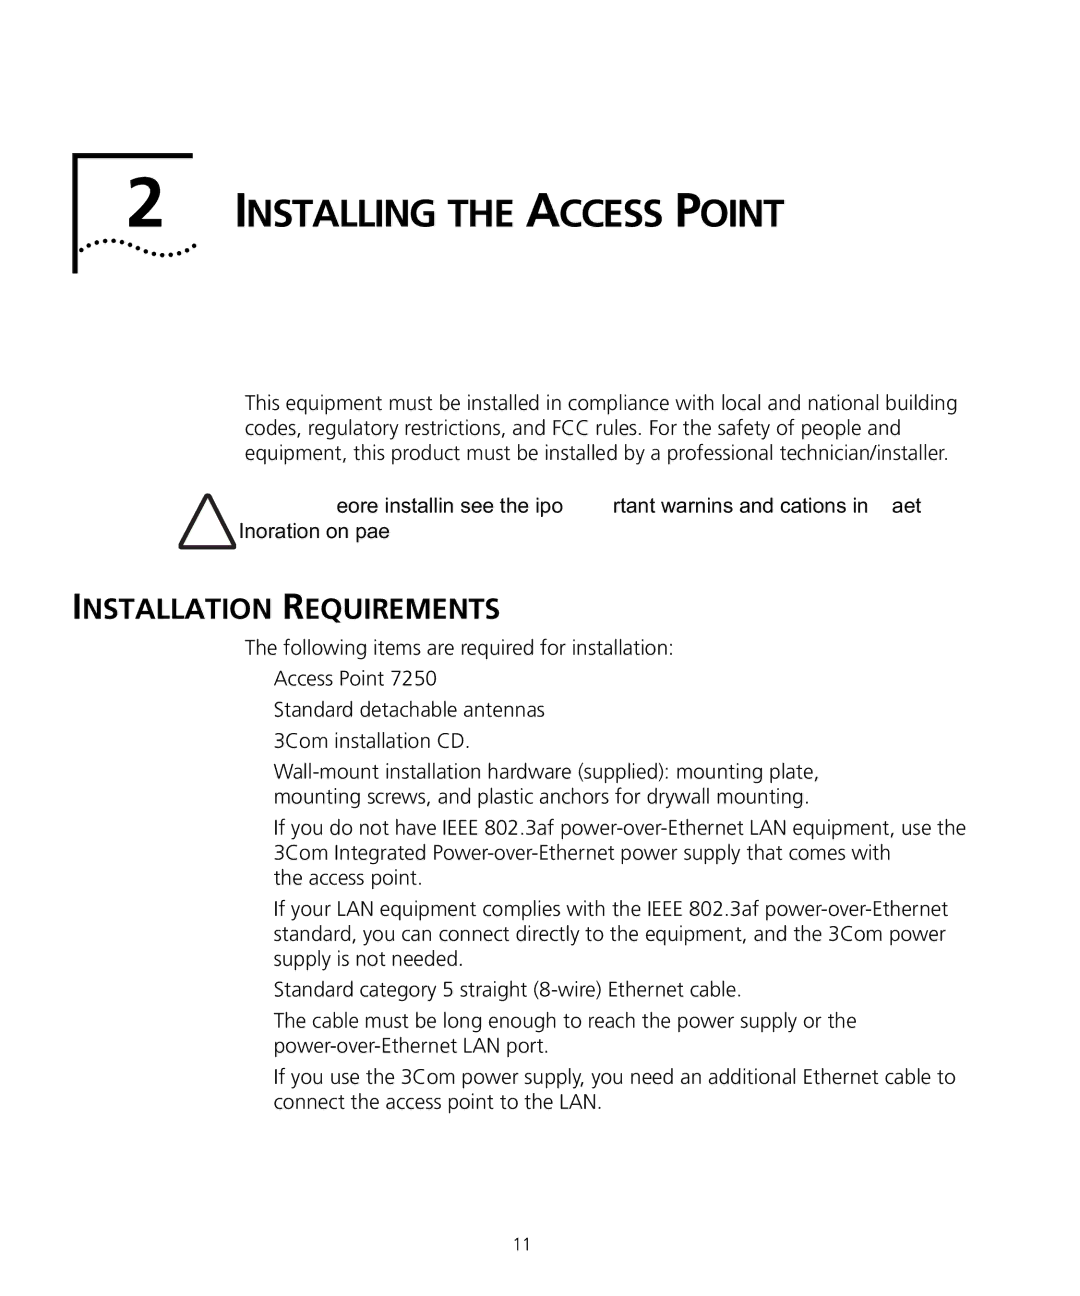 3Com WL-455 manual Installing the Access Point, Installation Requirements 